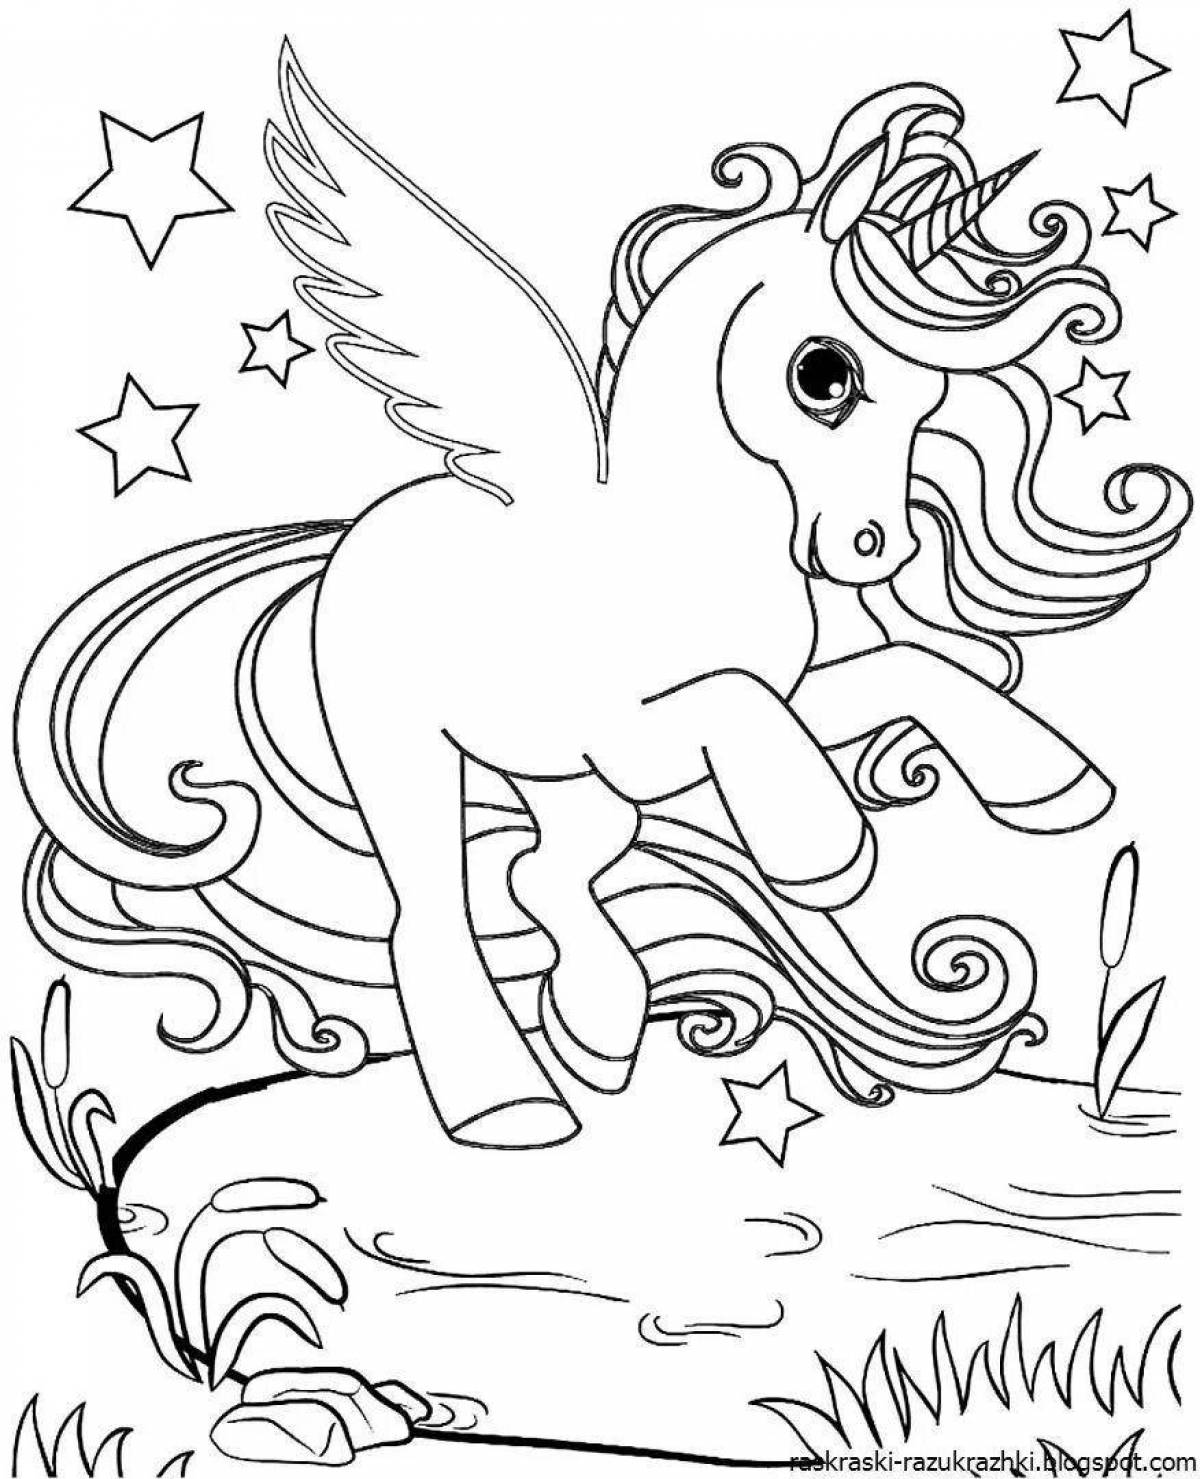 Magic coloring book for girls 6 years old unicorn